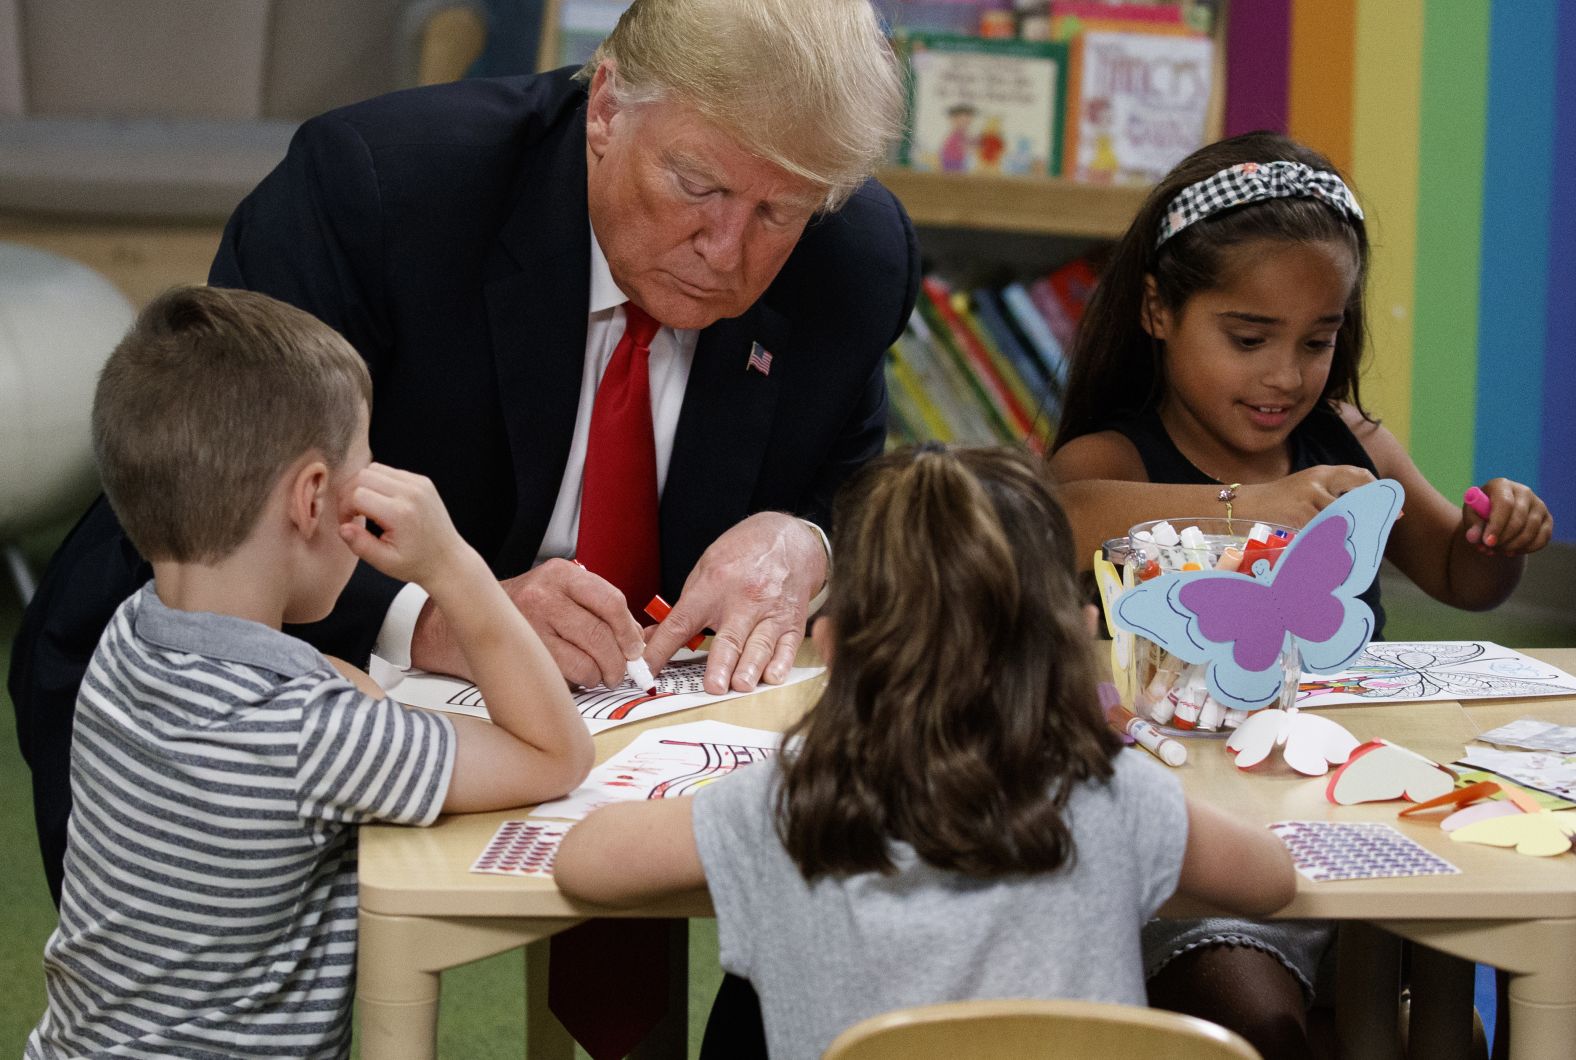 Trump colors with a group of children during a visit to the Nationwide Children's Hospital in Columbus, Ohio, on August 24.